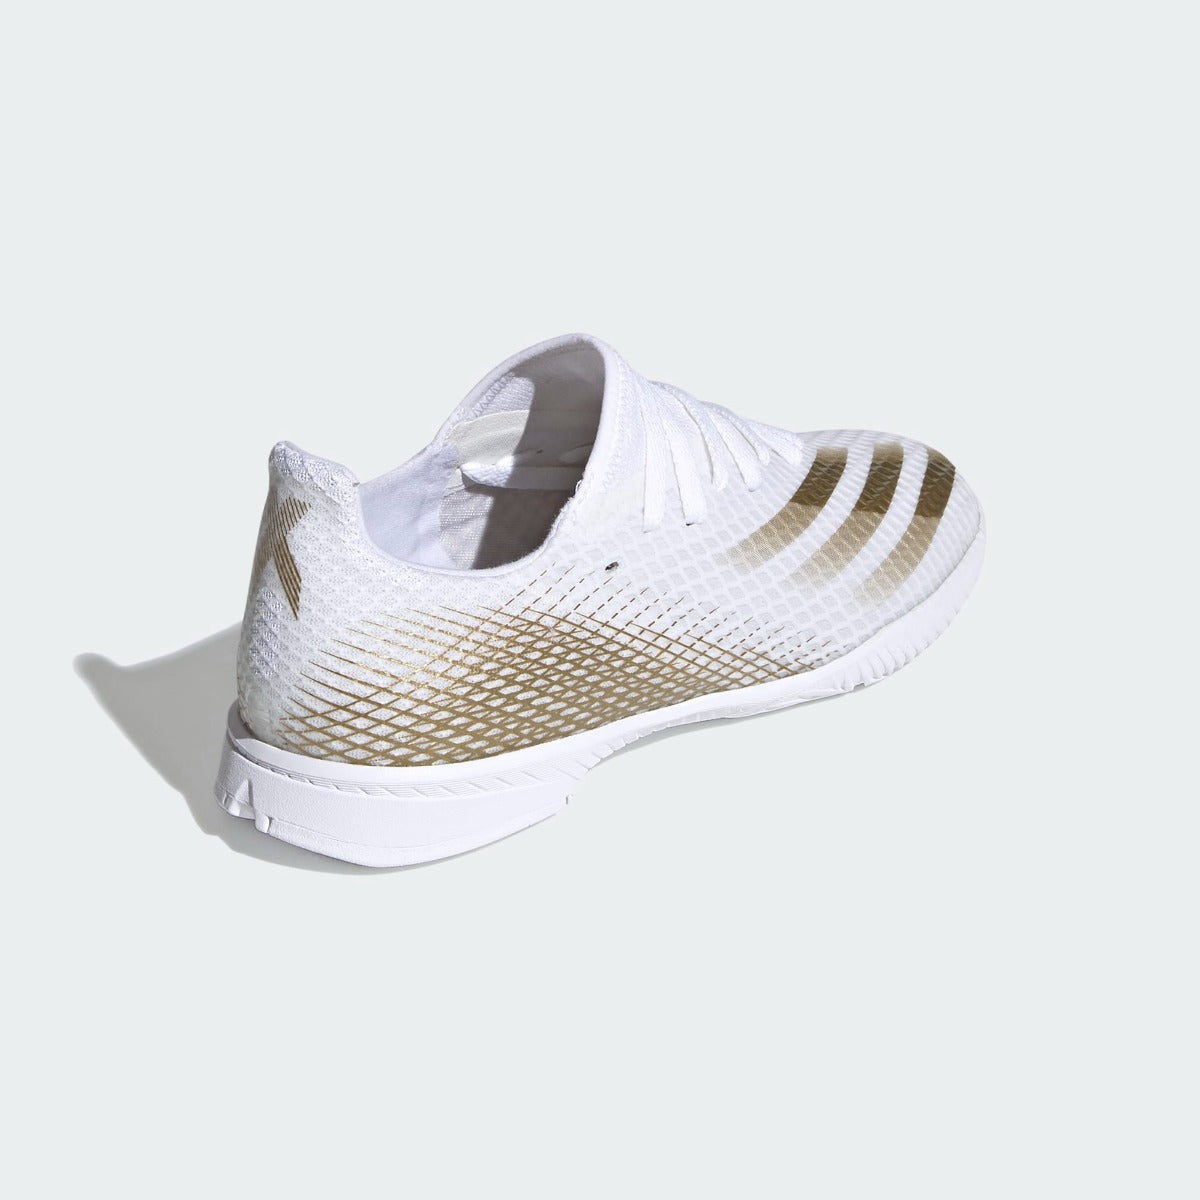 Adidas JR X Ghosted.3 IN - White-Gold